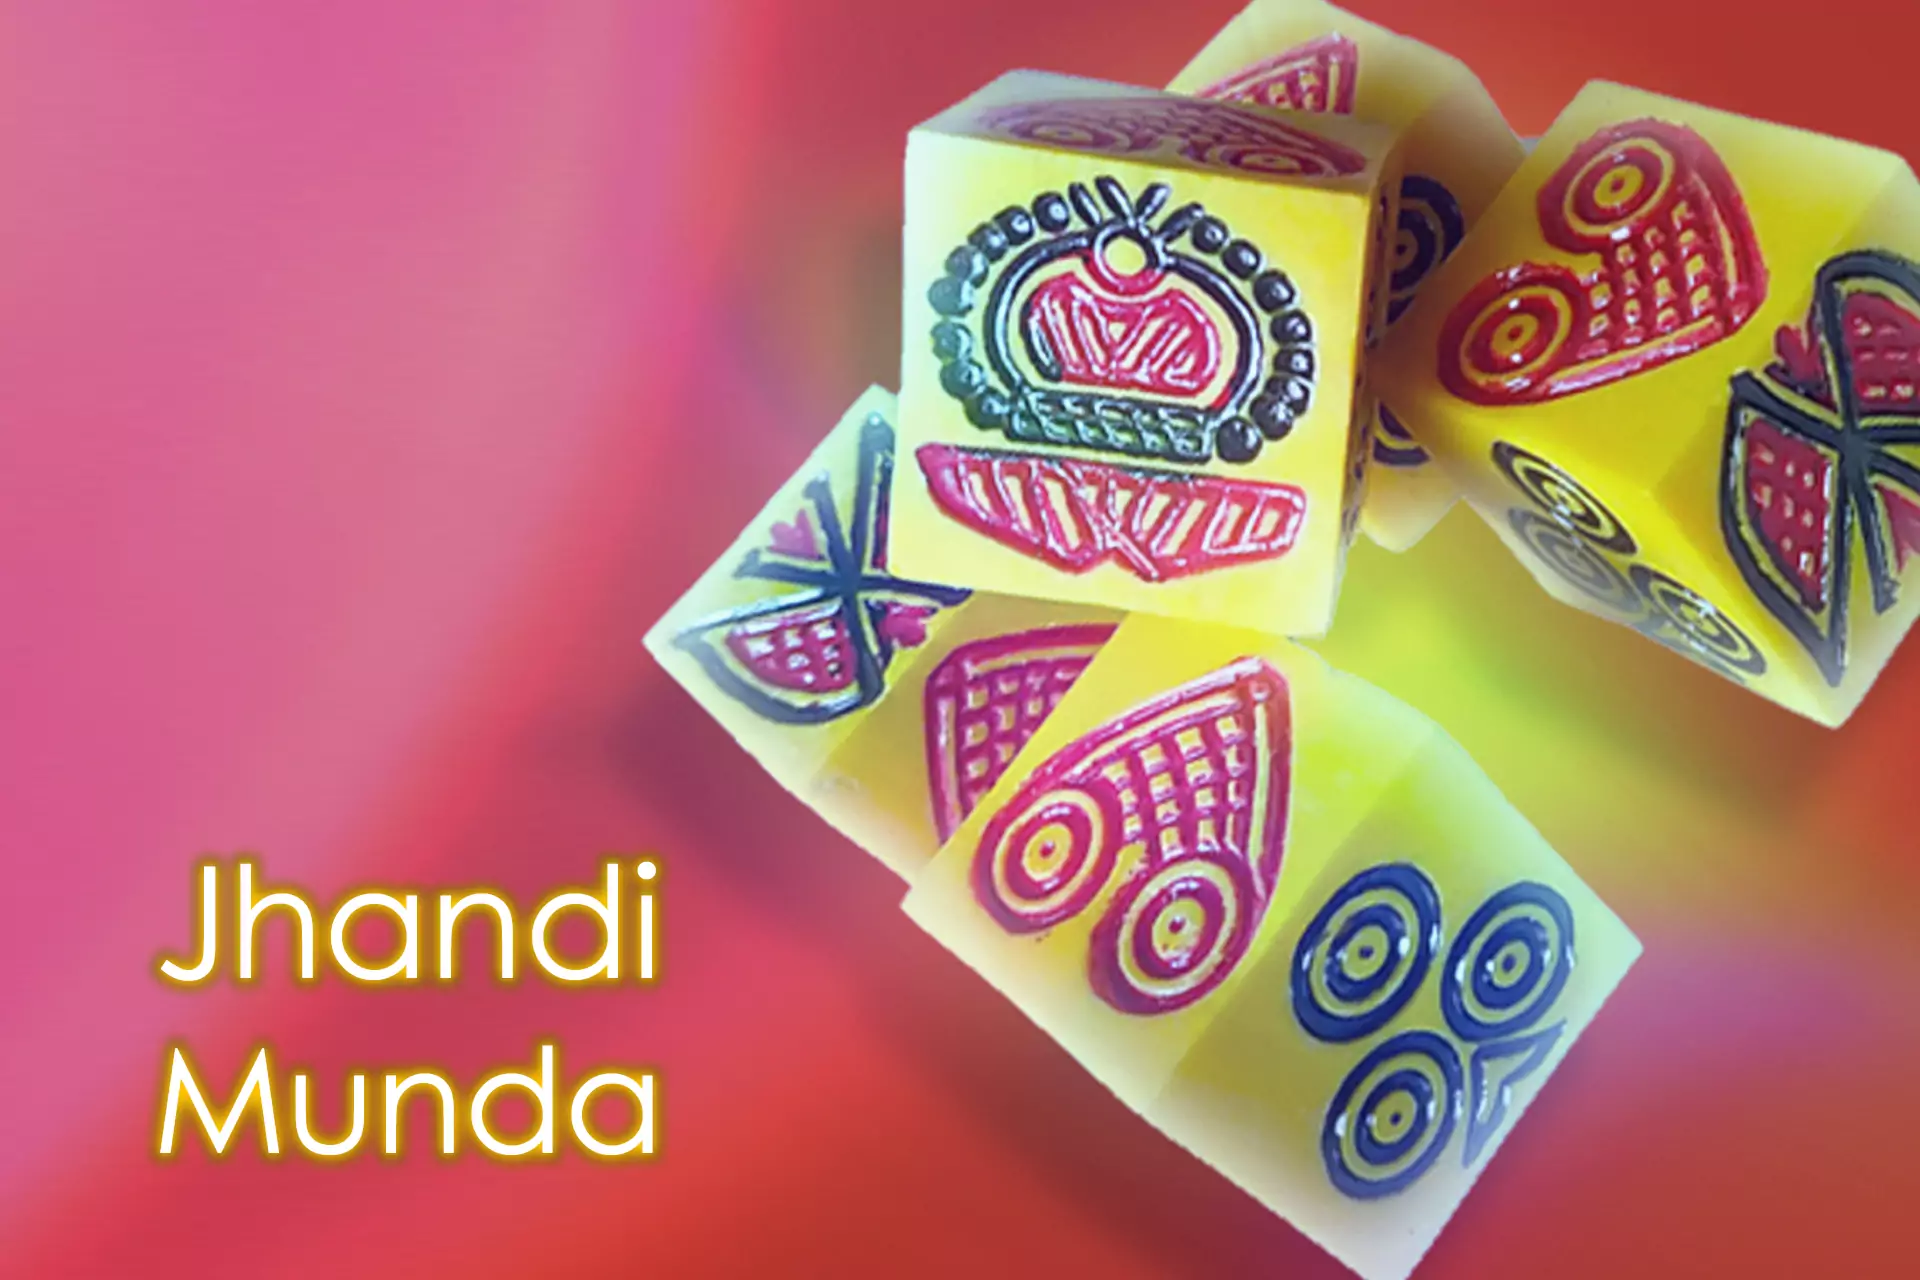 In Jhandi Munda there are six dice involved in the game with special symbols.